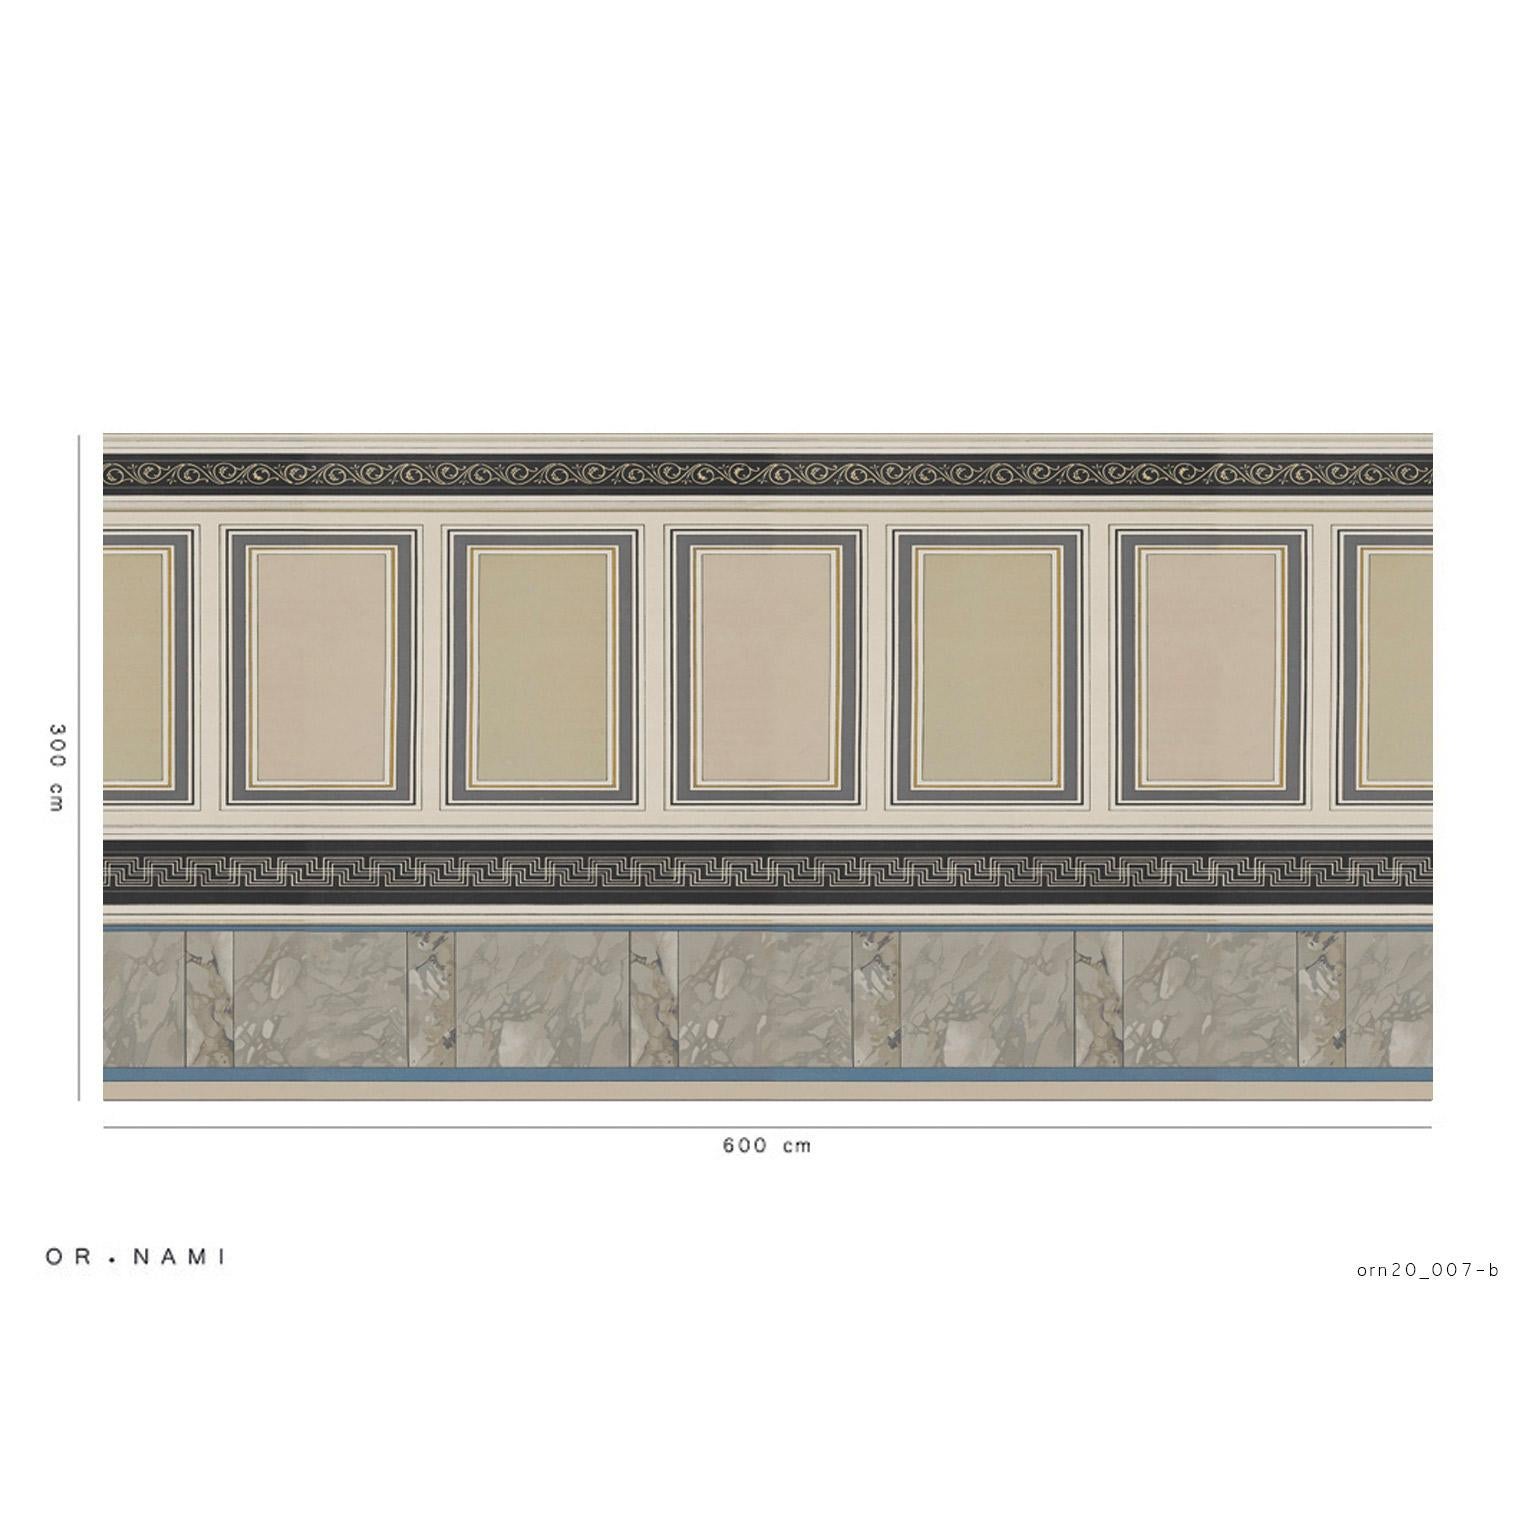 ORN20_007 It is an homage to the early Pompeian style of frescoes present in many of the temples and residences in Pompeii and Herculaneum, which have survived to the present day in all their sumptuous beauty. Large geometric bands which imitate the